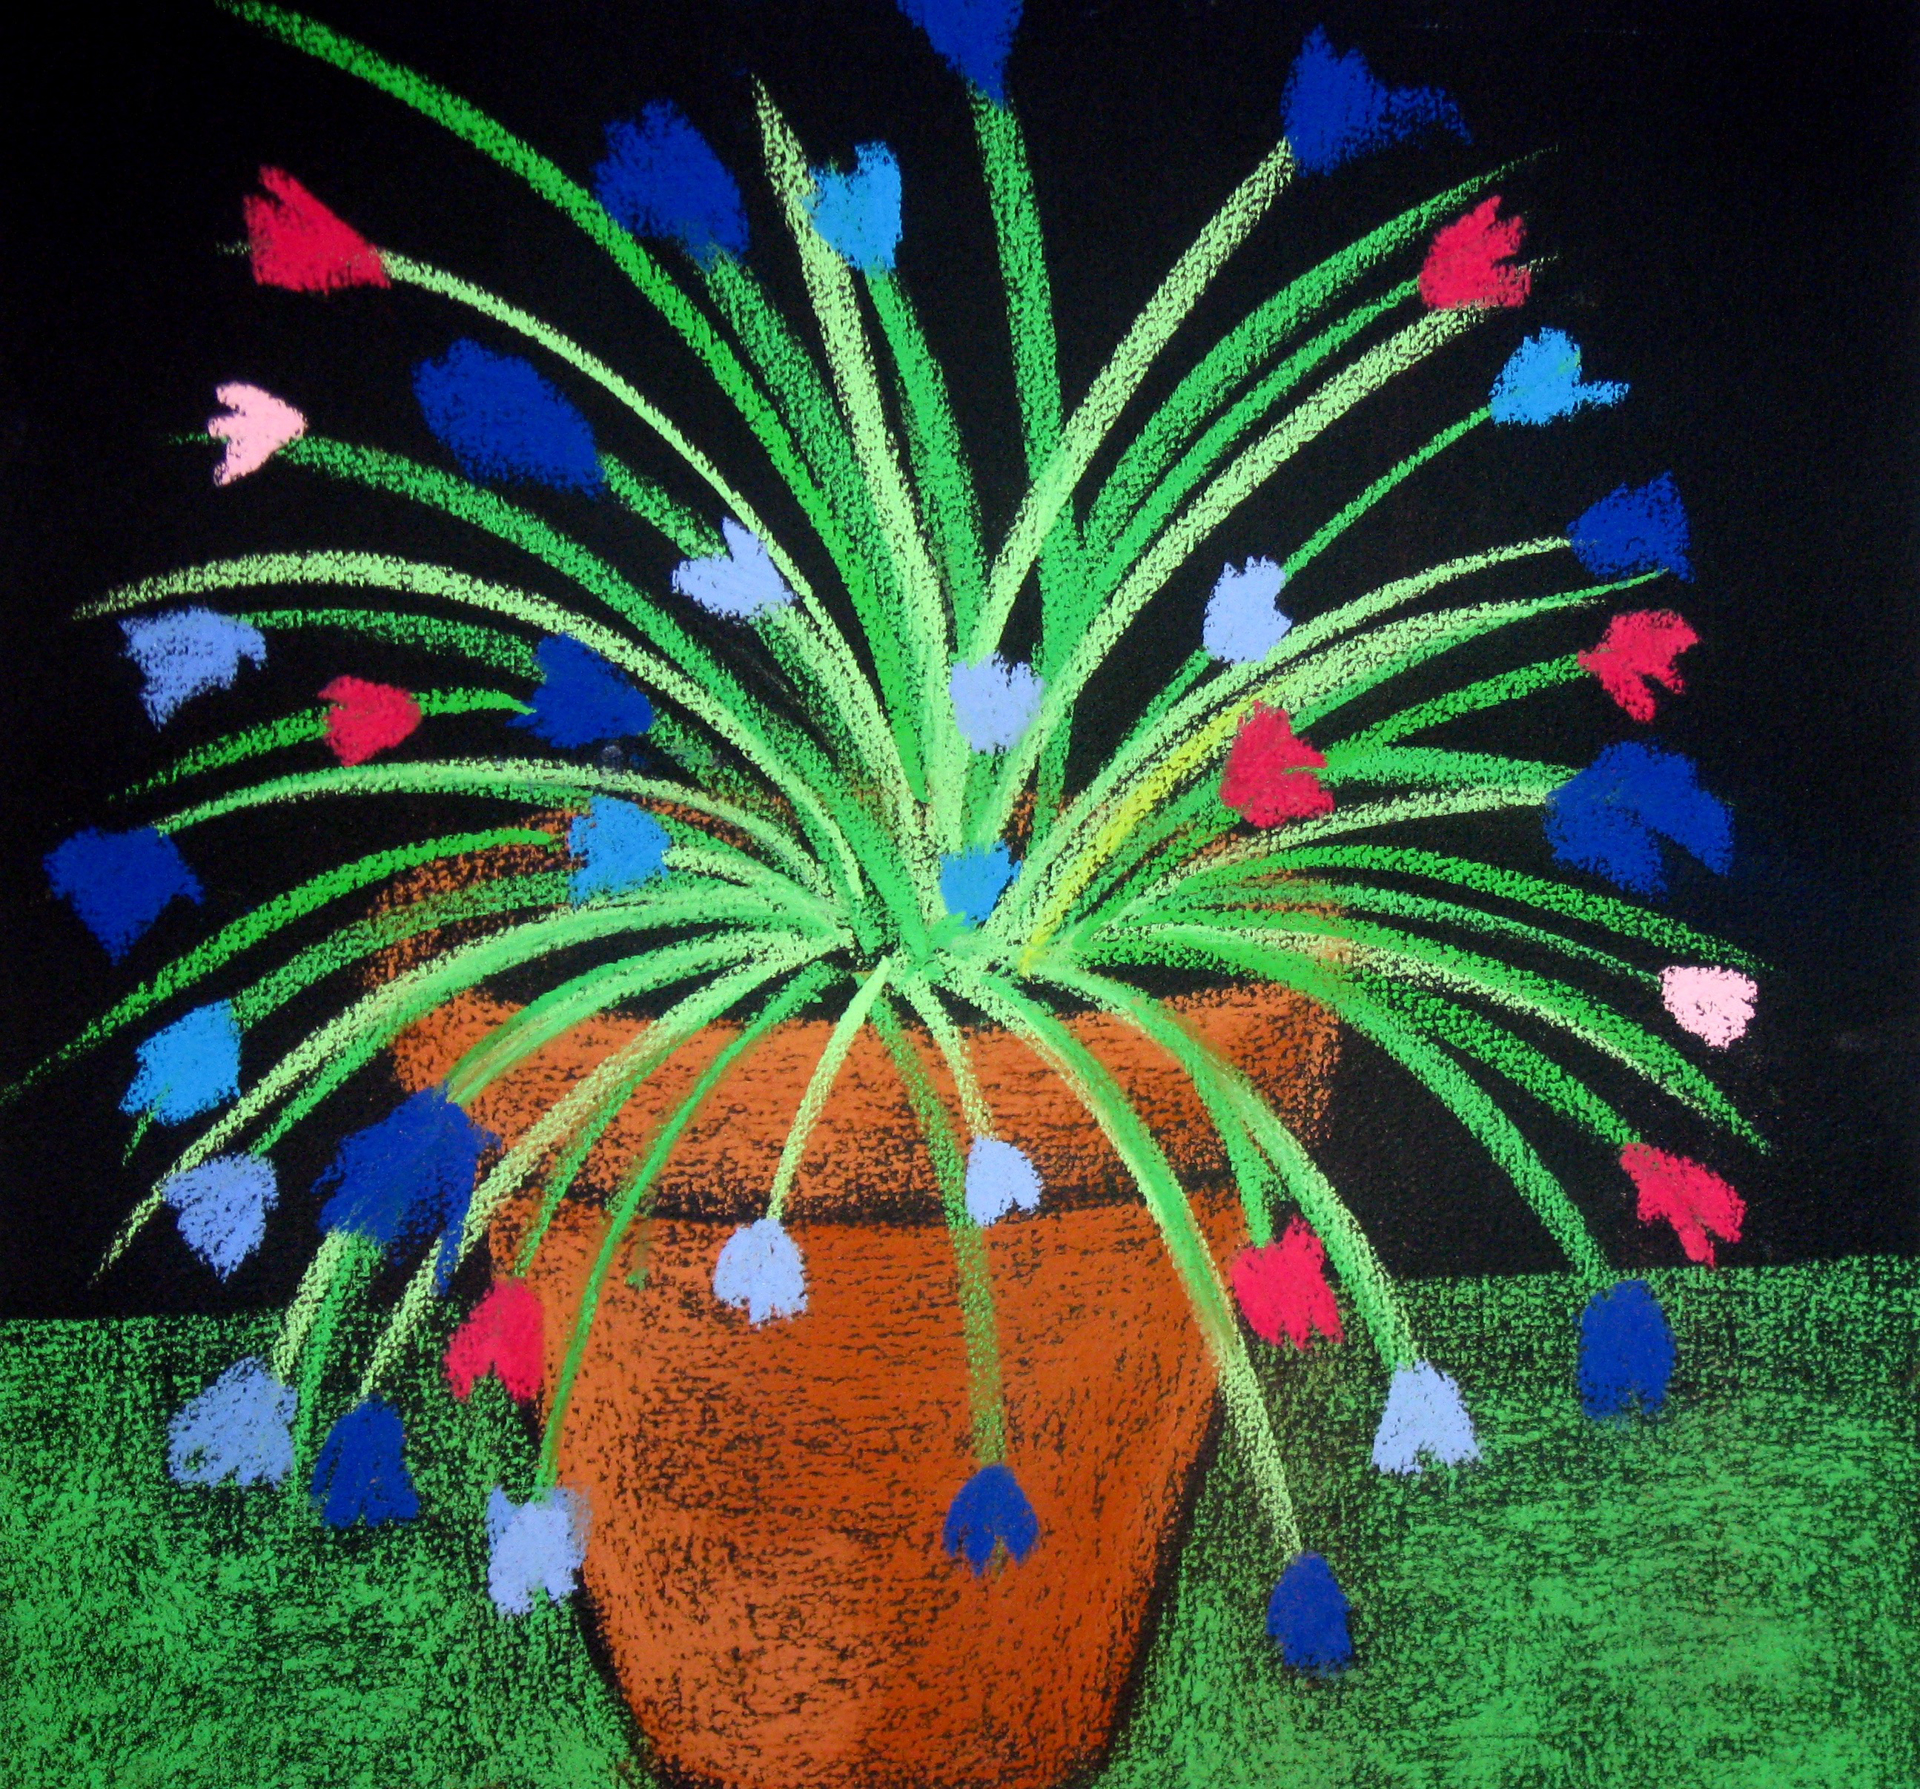 Flower Pot - SOLD available for commission by Carole LaRoche